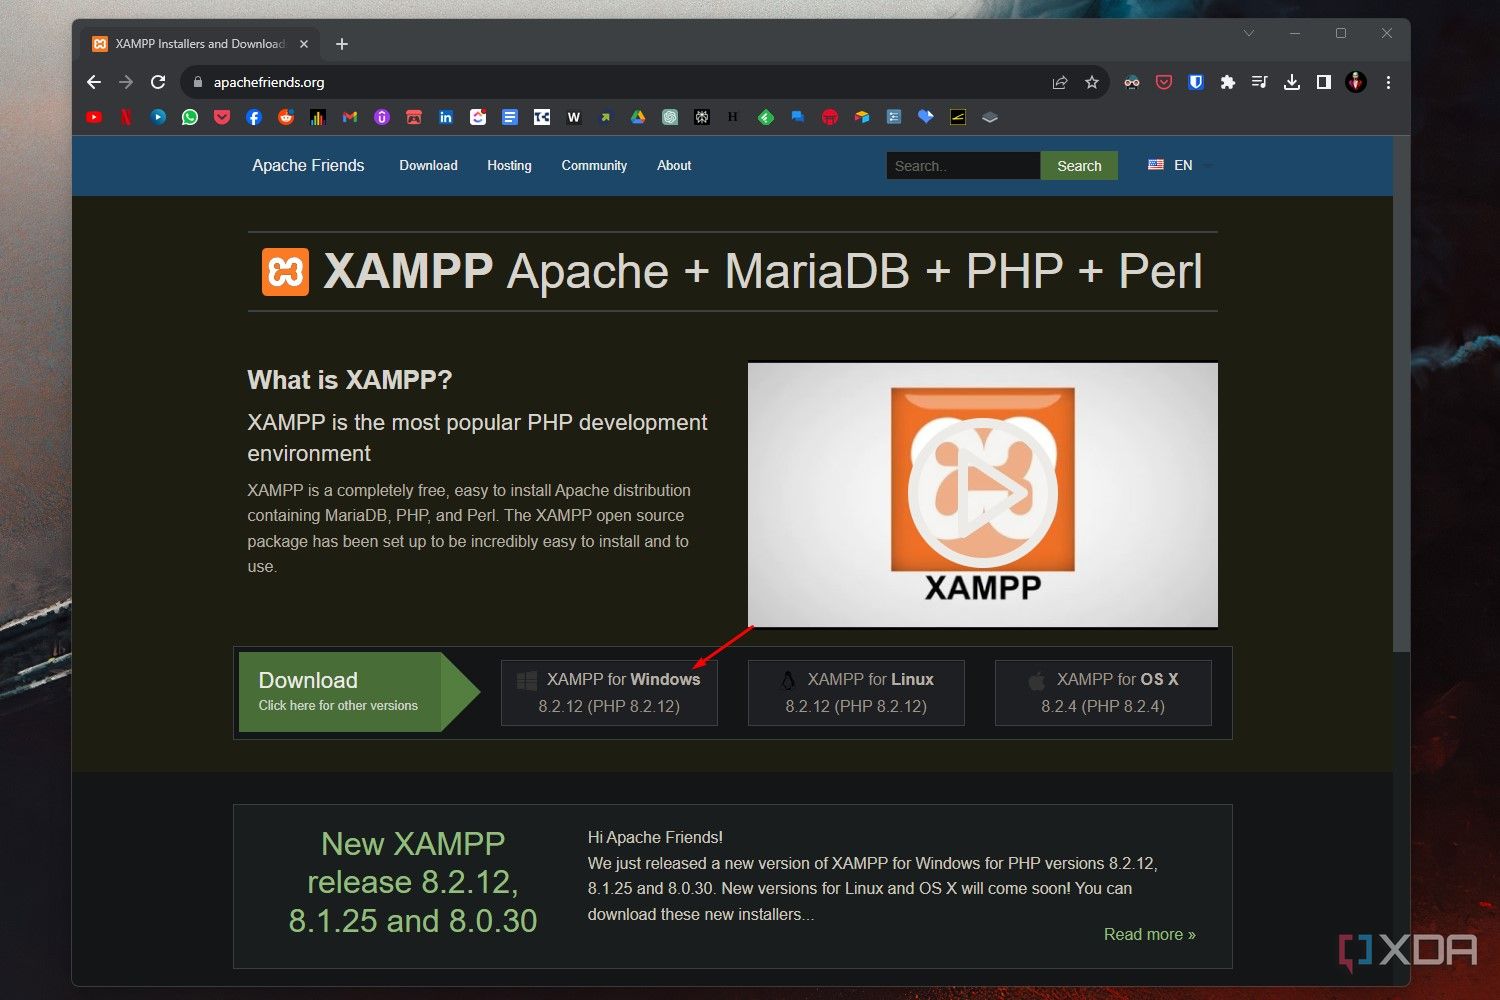 A Google Chrome screenshot showing the download page for the XAMPP application